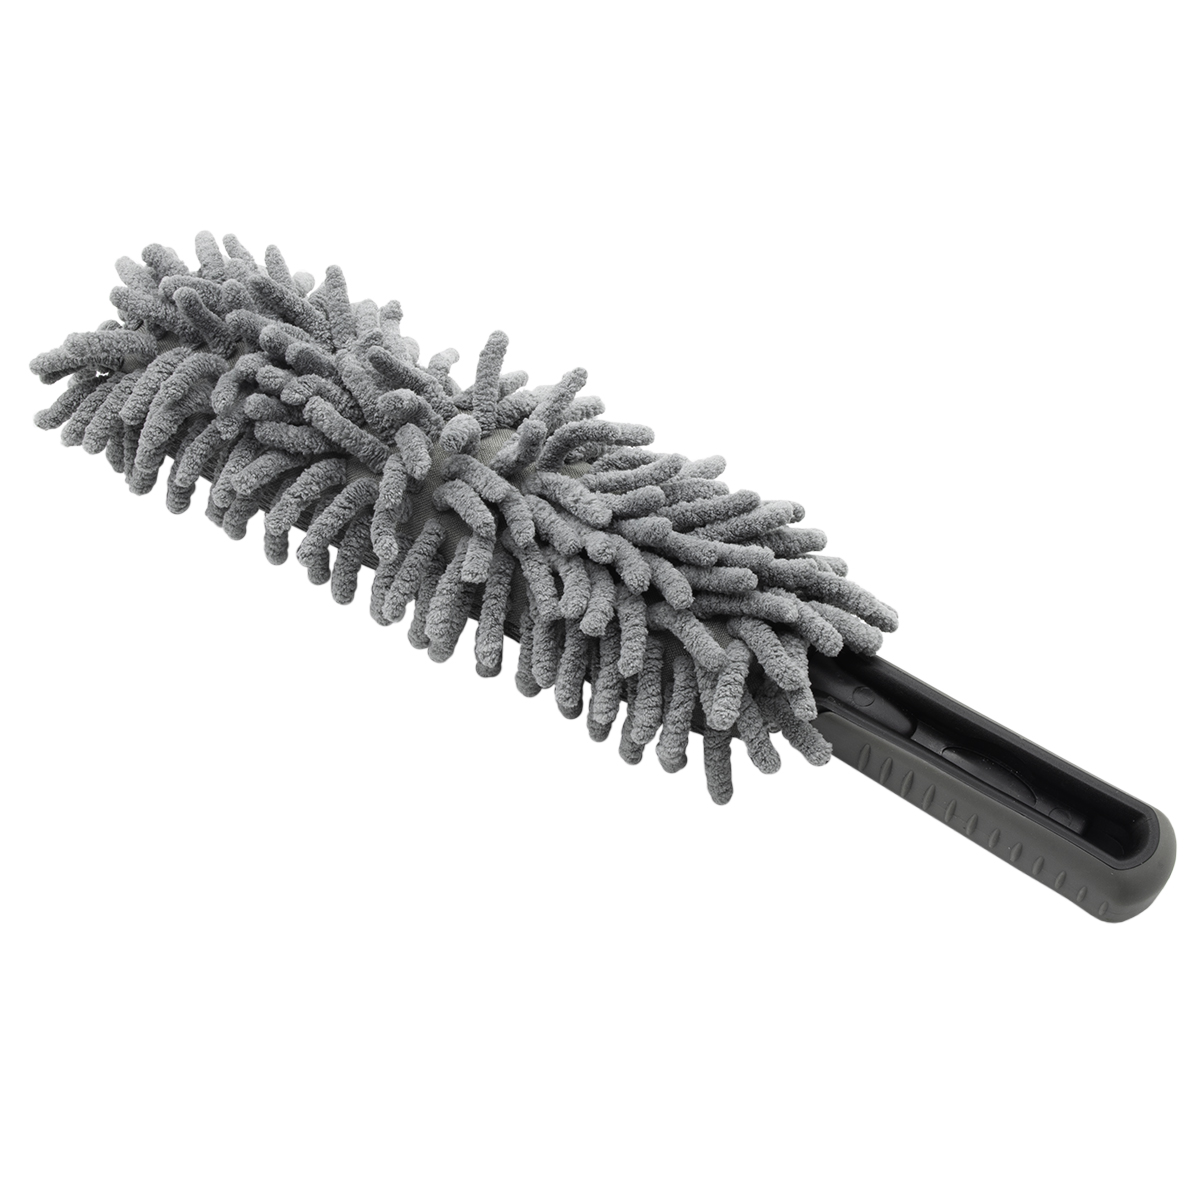 HelpMate HM24577 2-in-1 Wheel Cleaner Soft Gentle Scrubber Wheel and Rim Brush-Truck Detailing Cleaning Supply